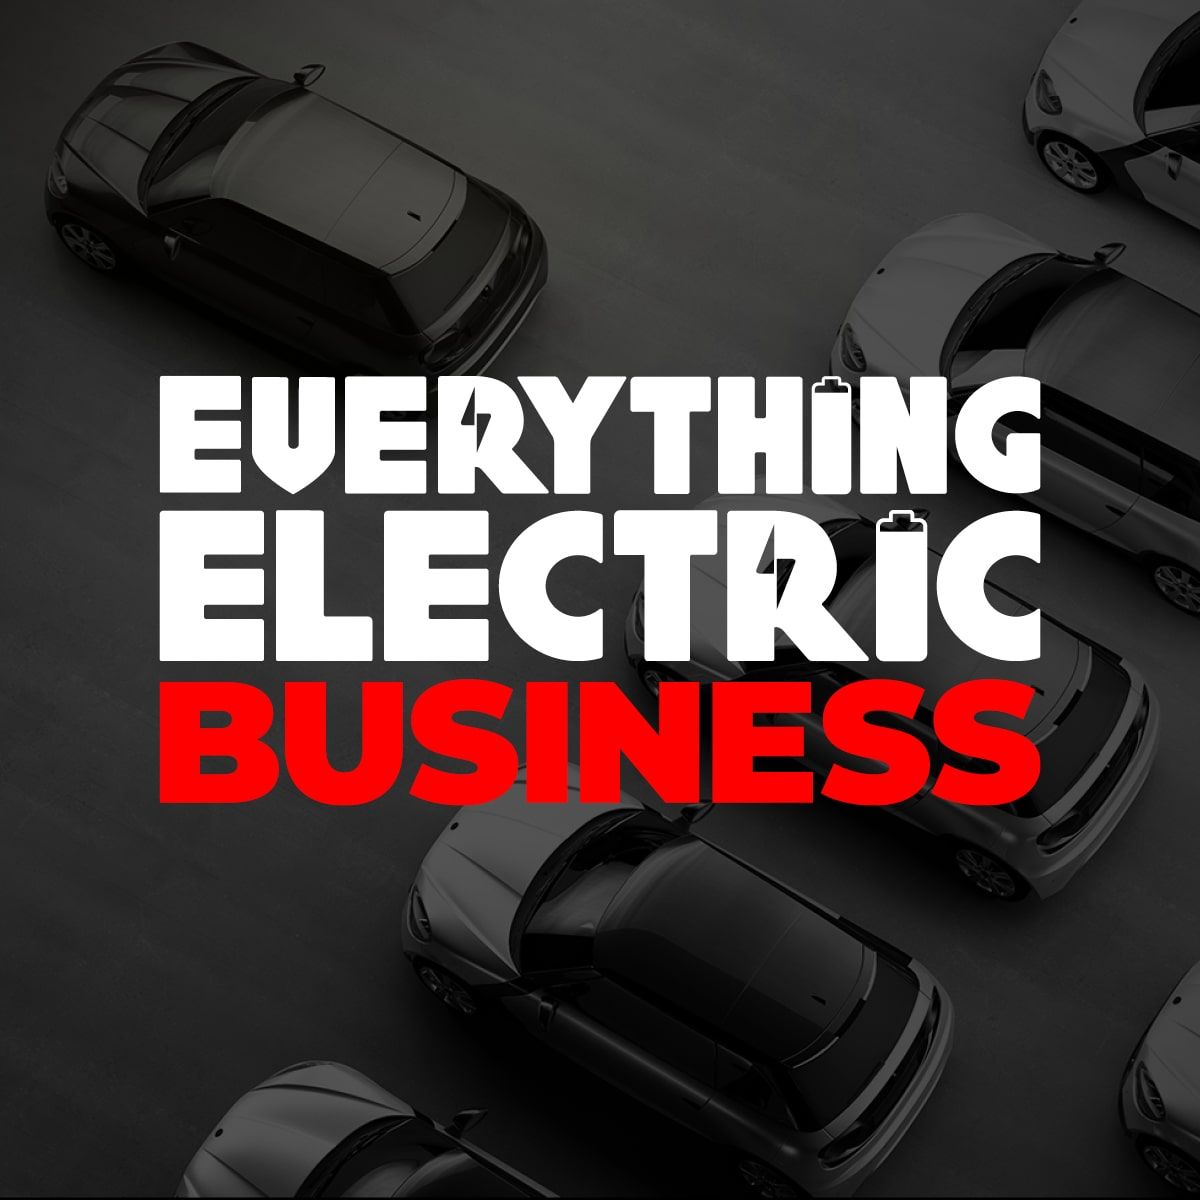 Everything Electric BUSINESS